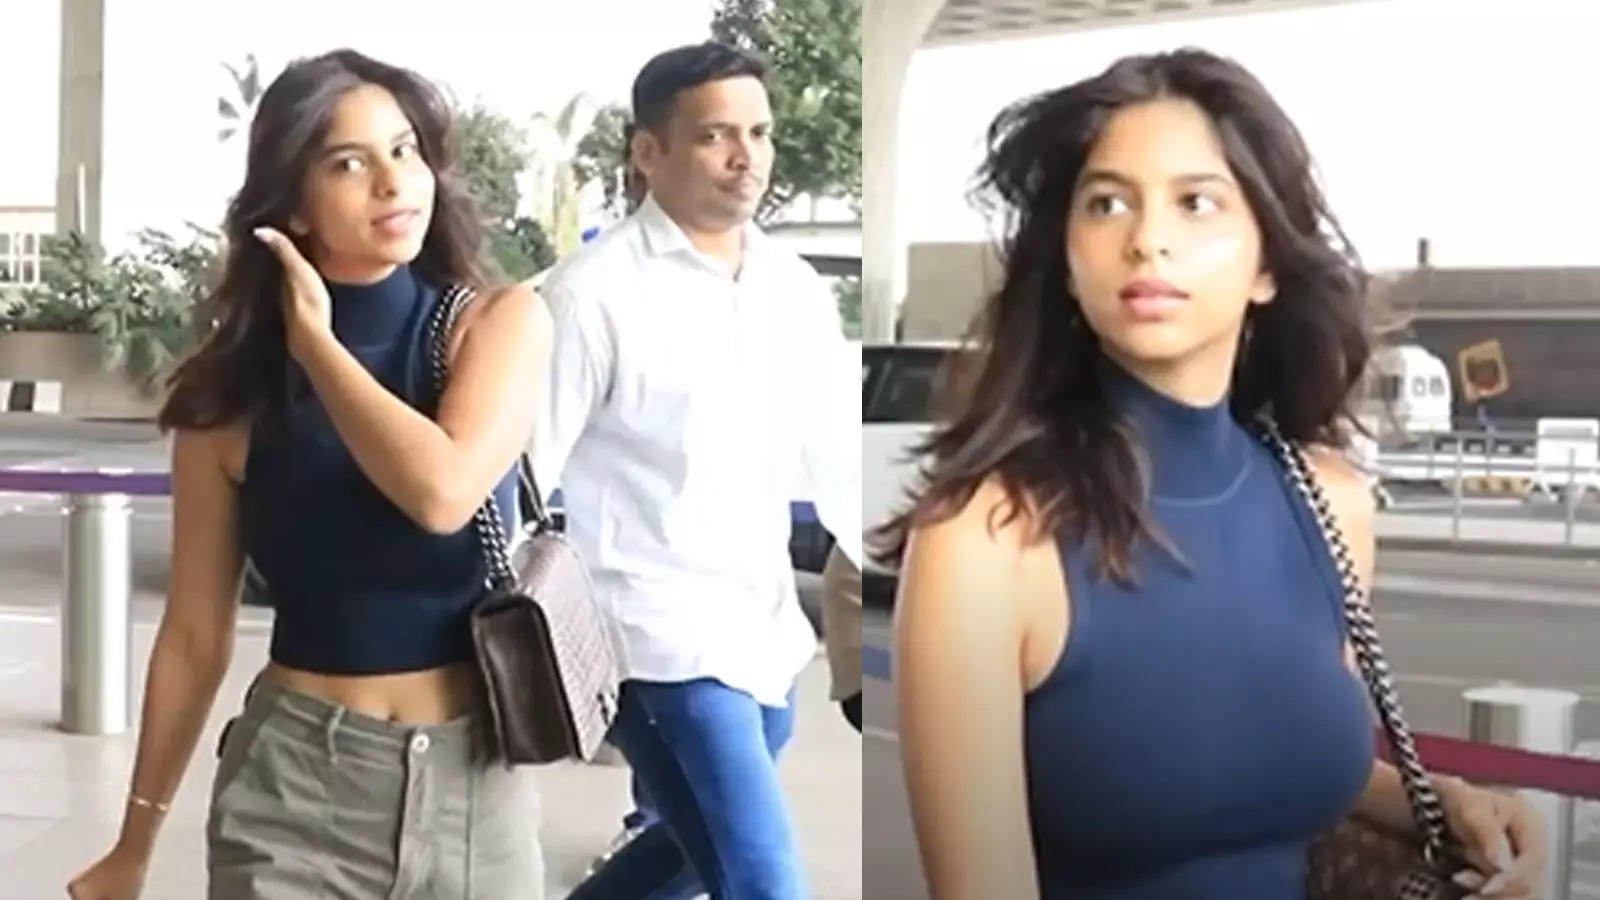 Suhana Khan was spotted at the airport wearing a short top, a